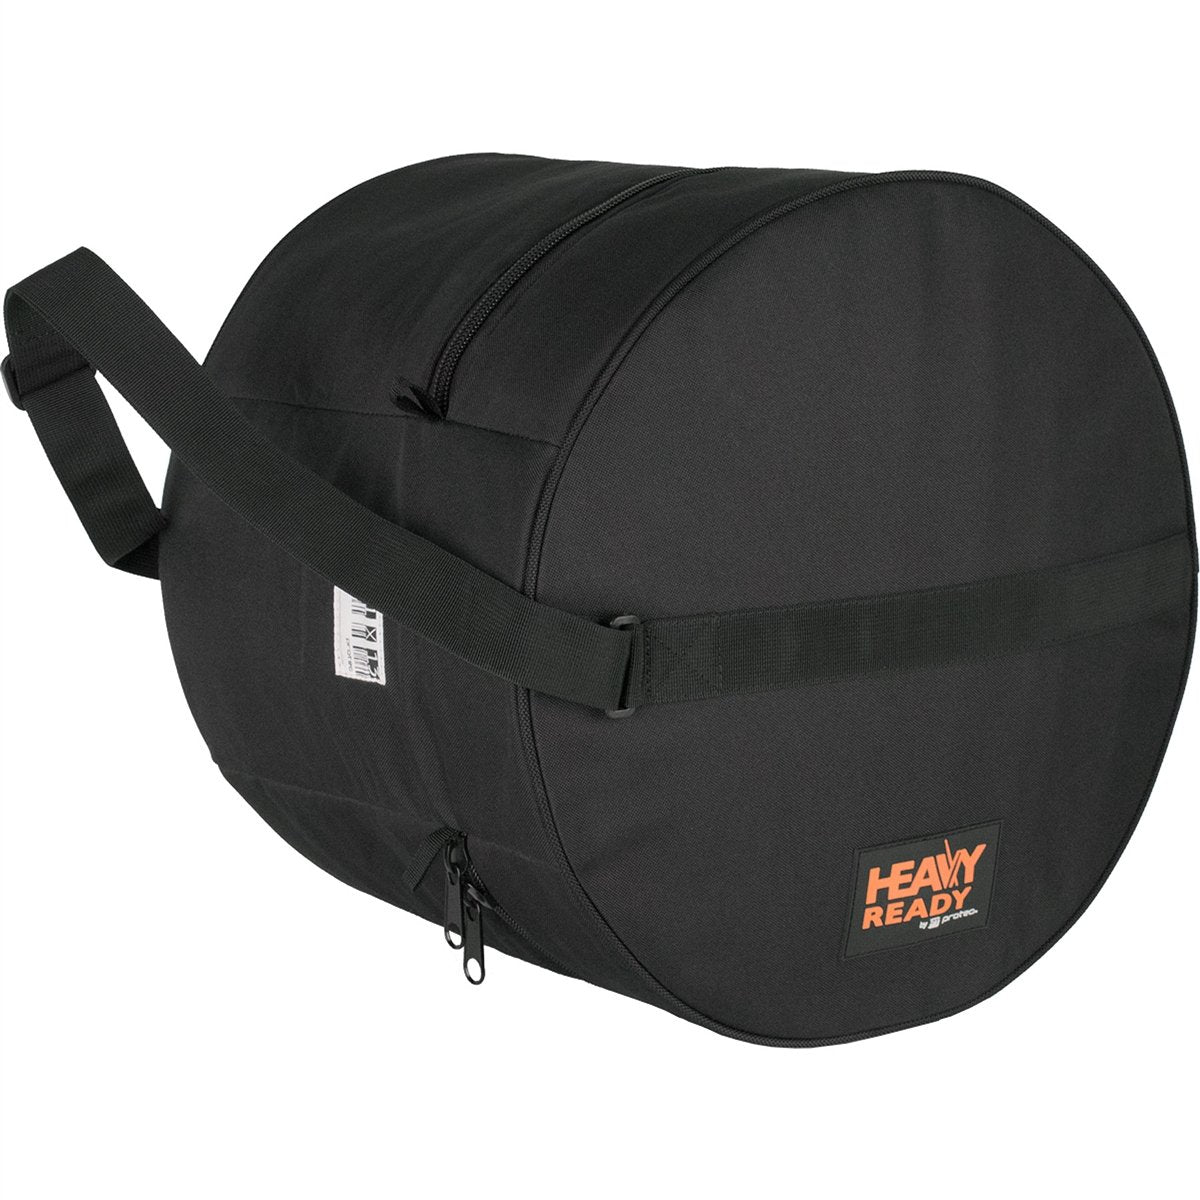 Protec - Padded Tom Bag 10â€³ X 12â€³ (Heavy Ready Series)-Percussion-Protec-Music Elements